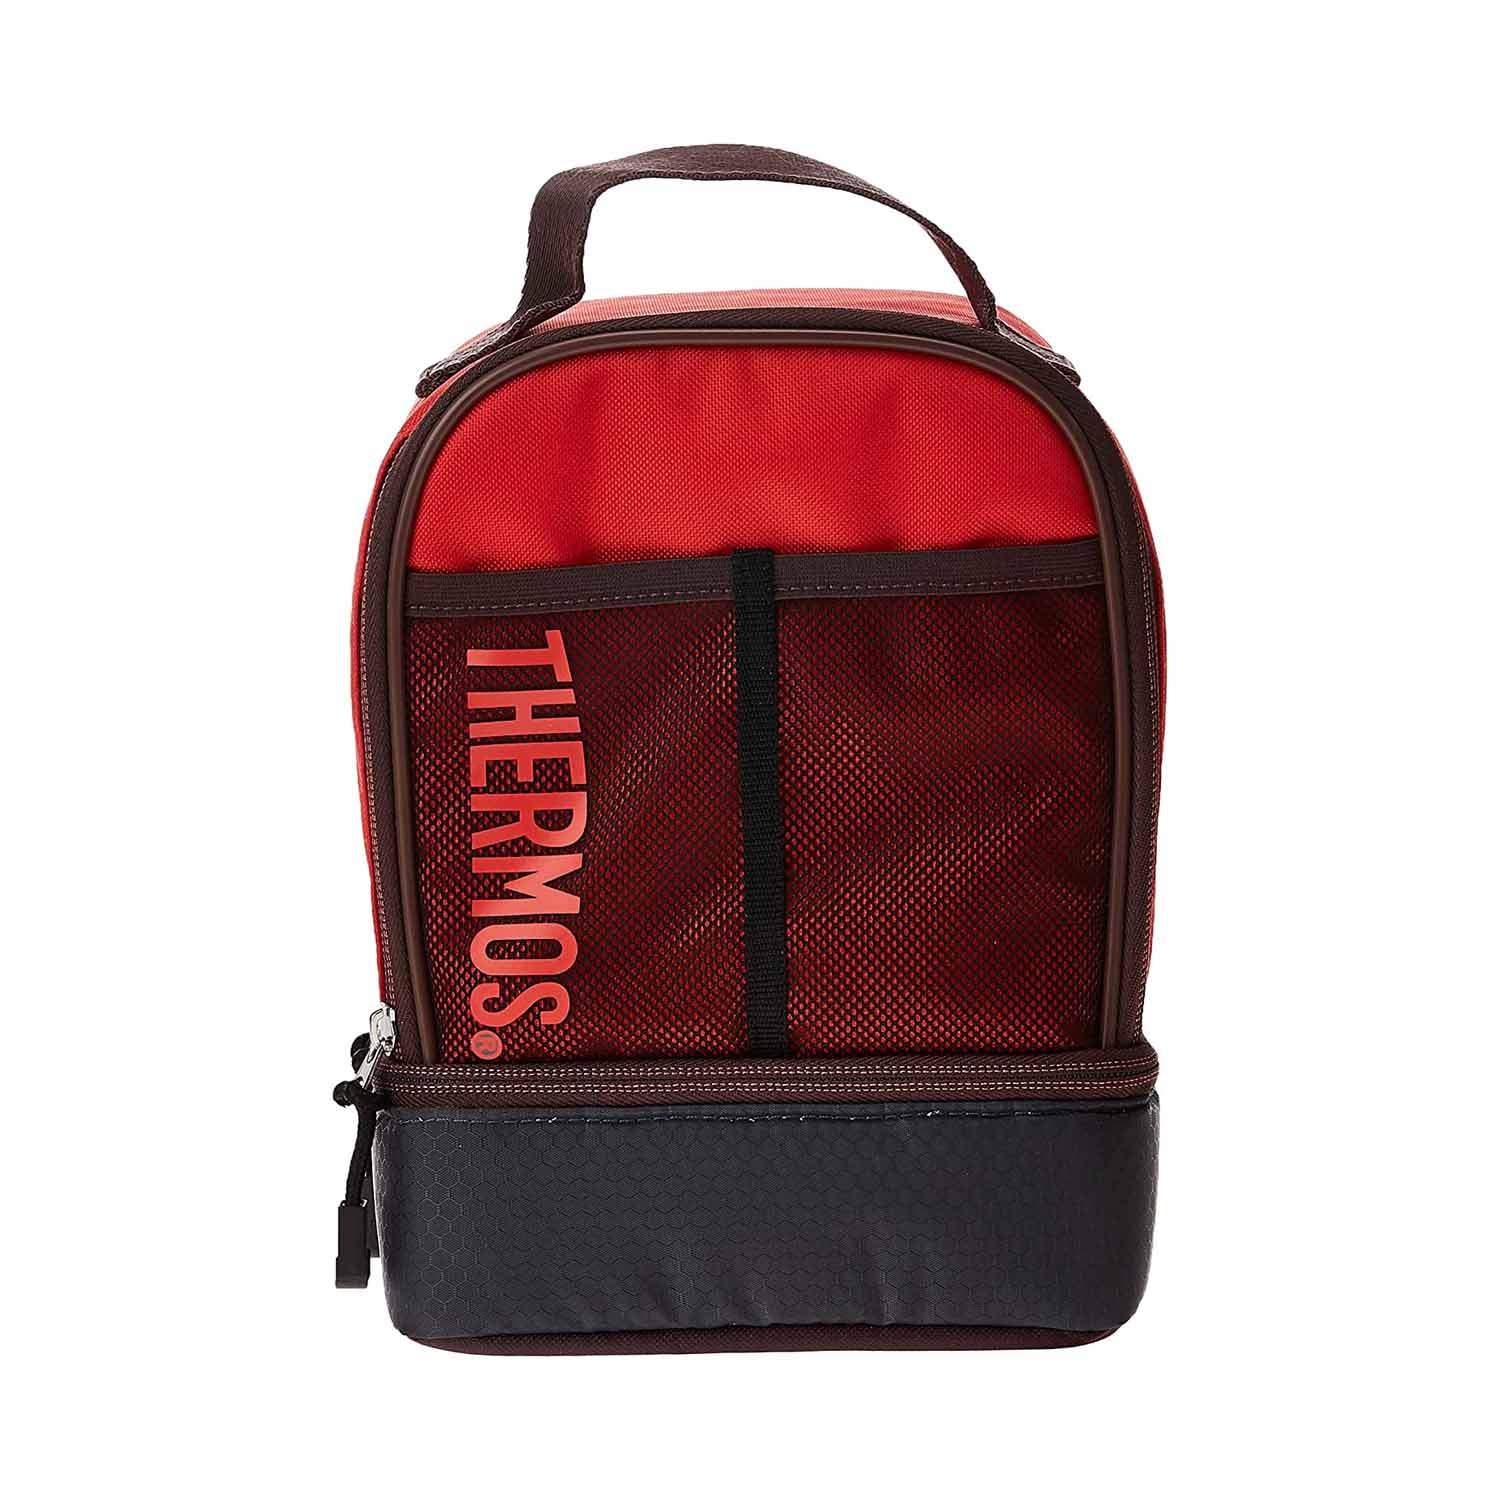 Thermos-Sport Mesh Dual Lunch Kit